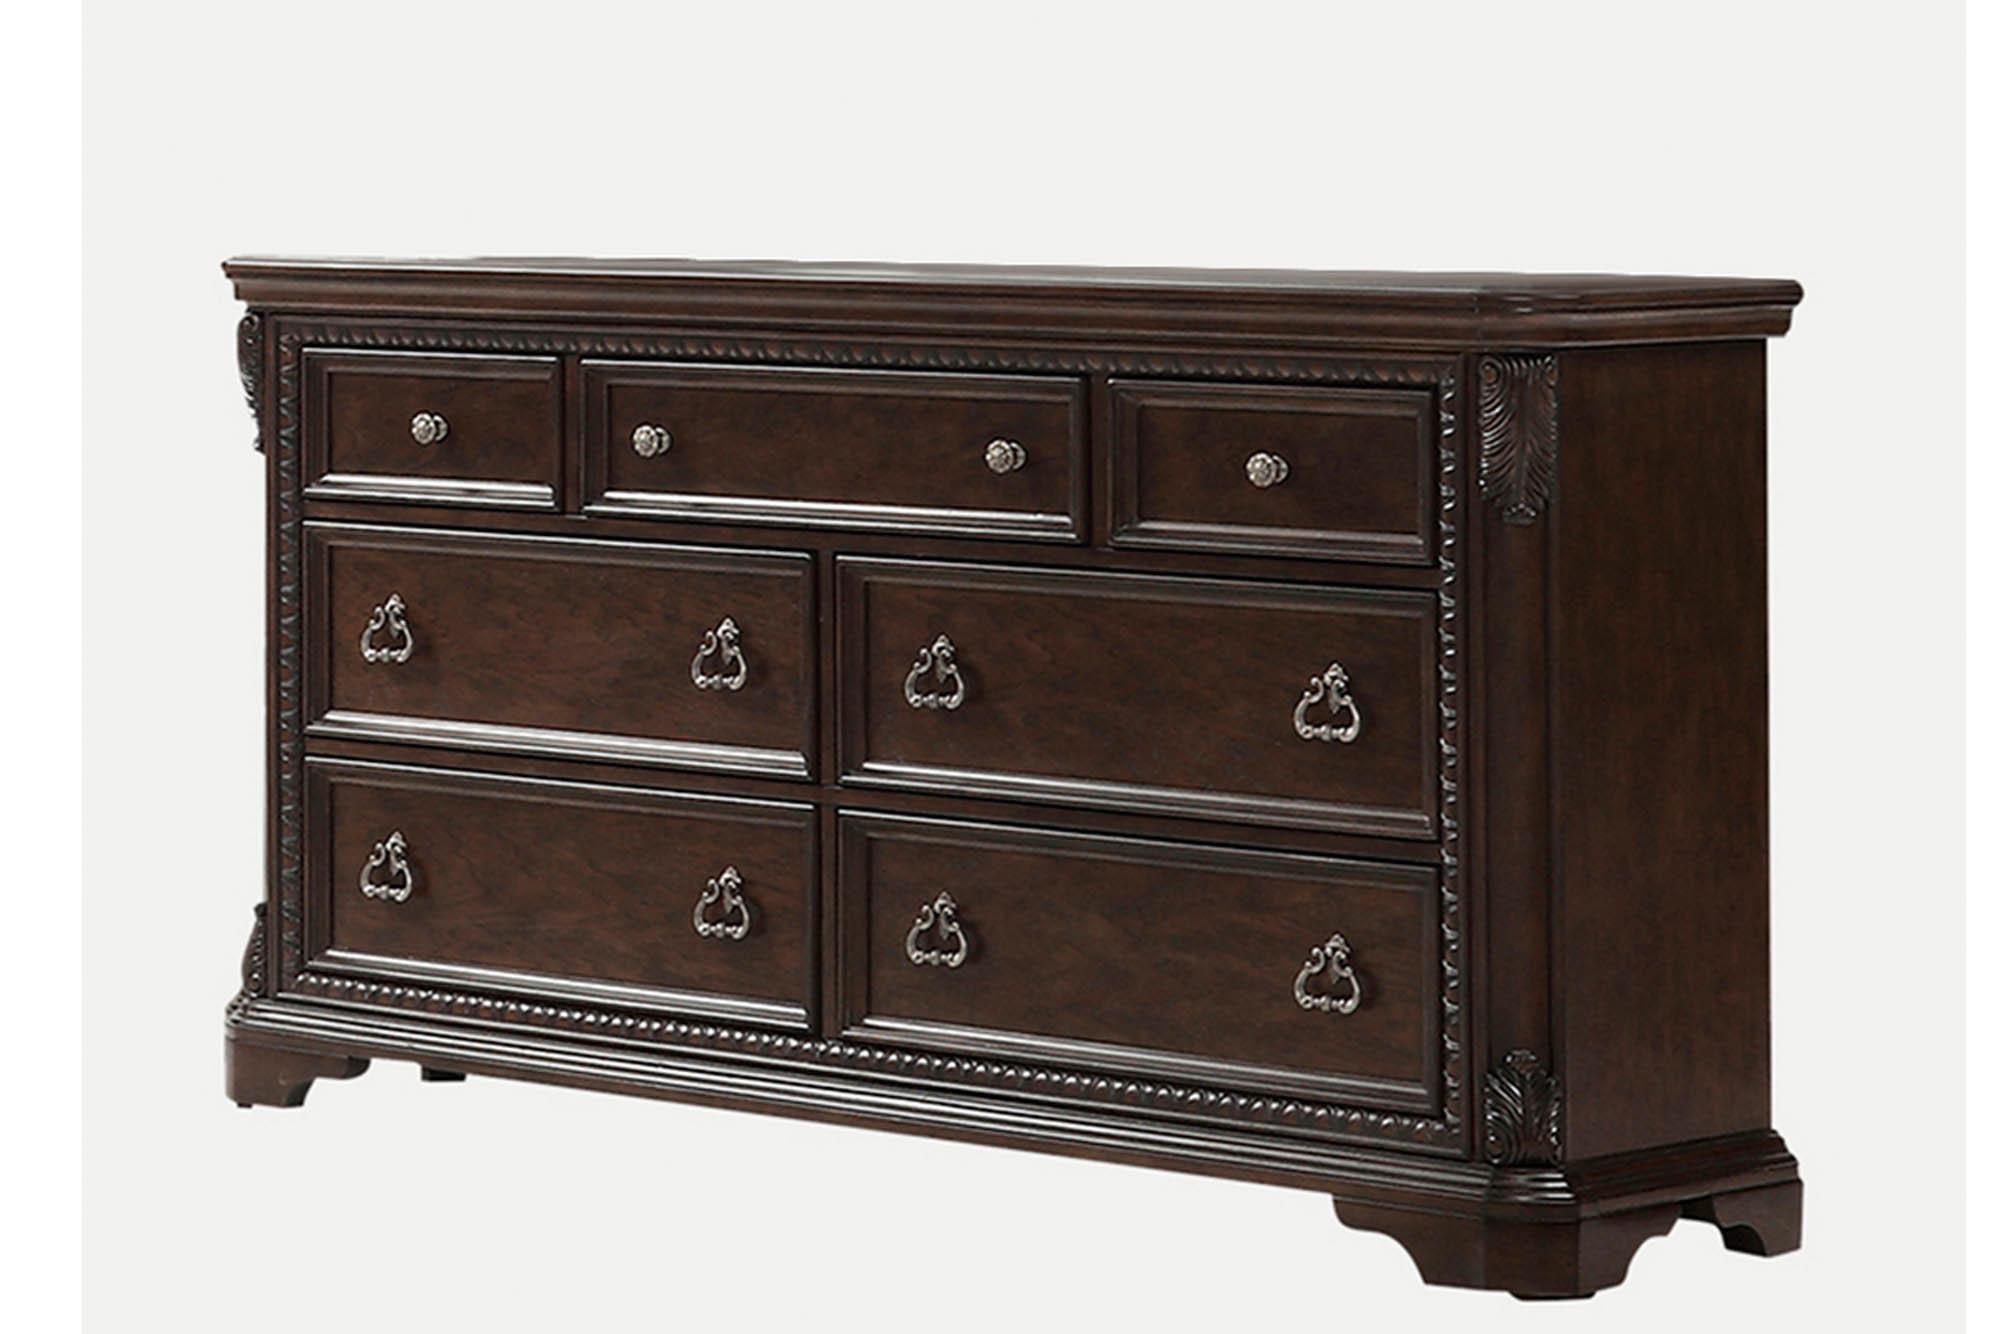 Modern, Transitional Dresser COVENTRY 1988-130 1988-130 in Mahogany 